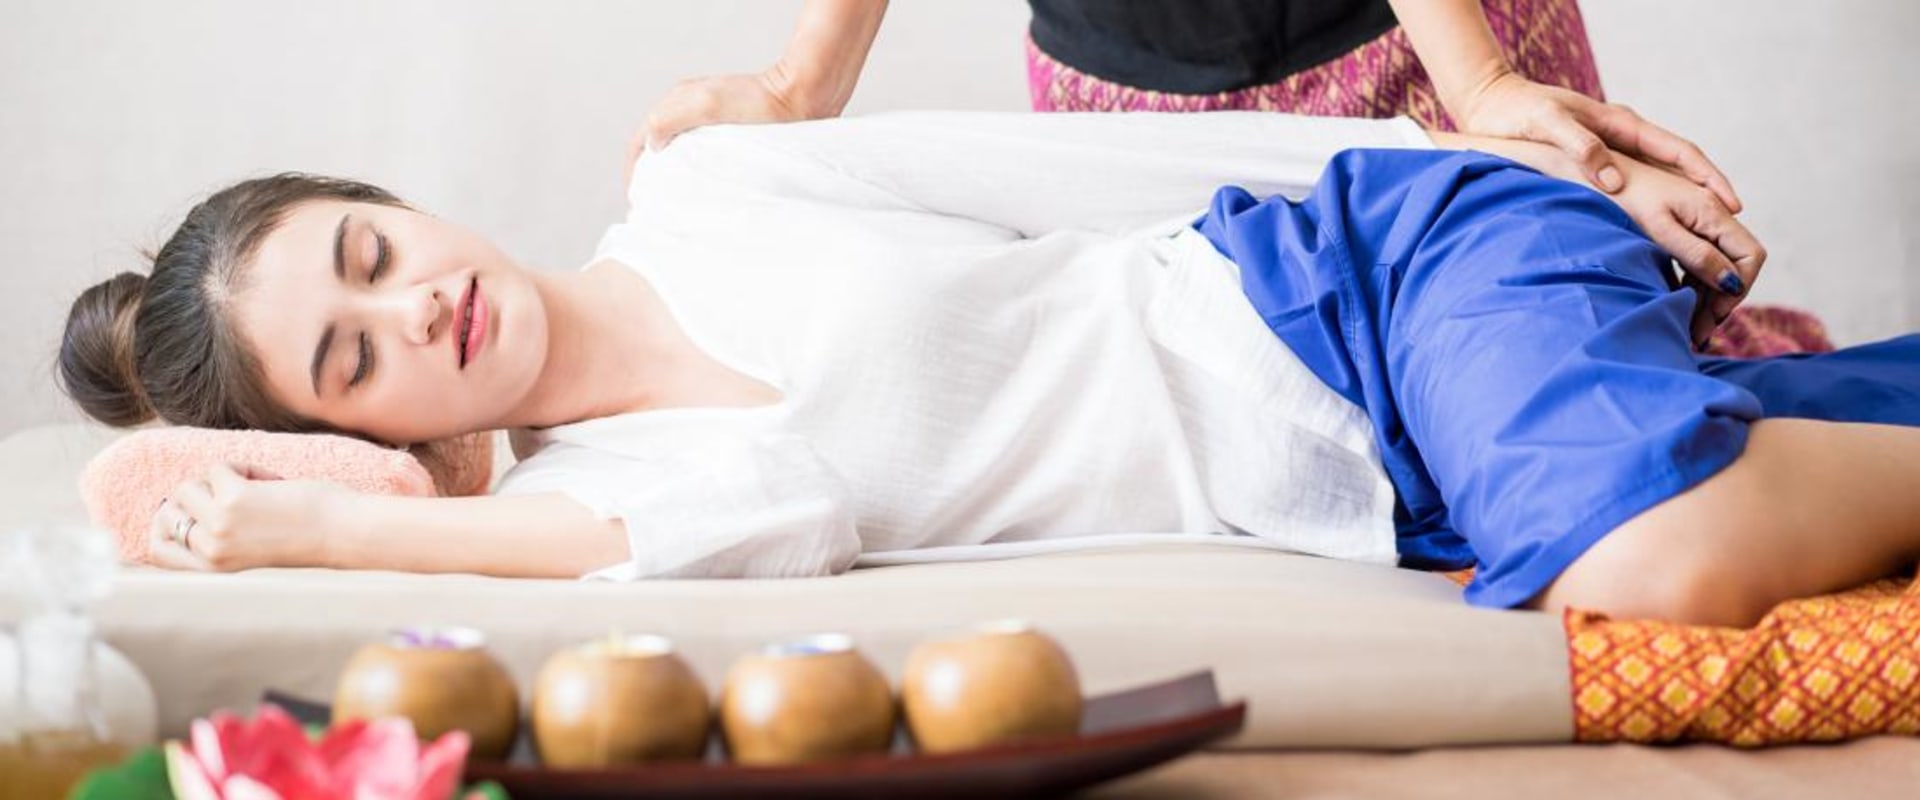 Can You Reap the Benefits of Body Massage Every Day?